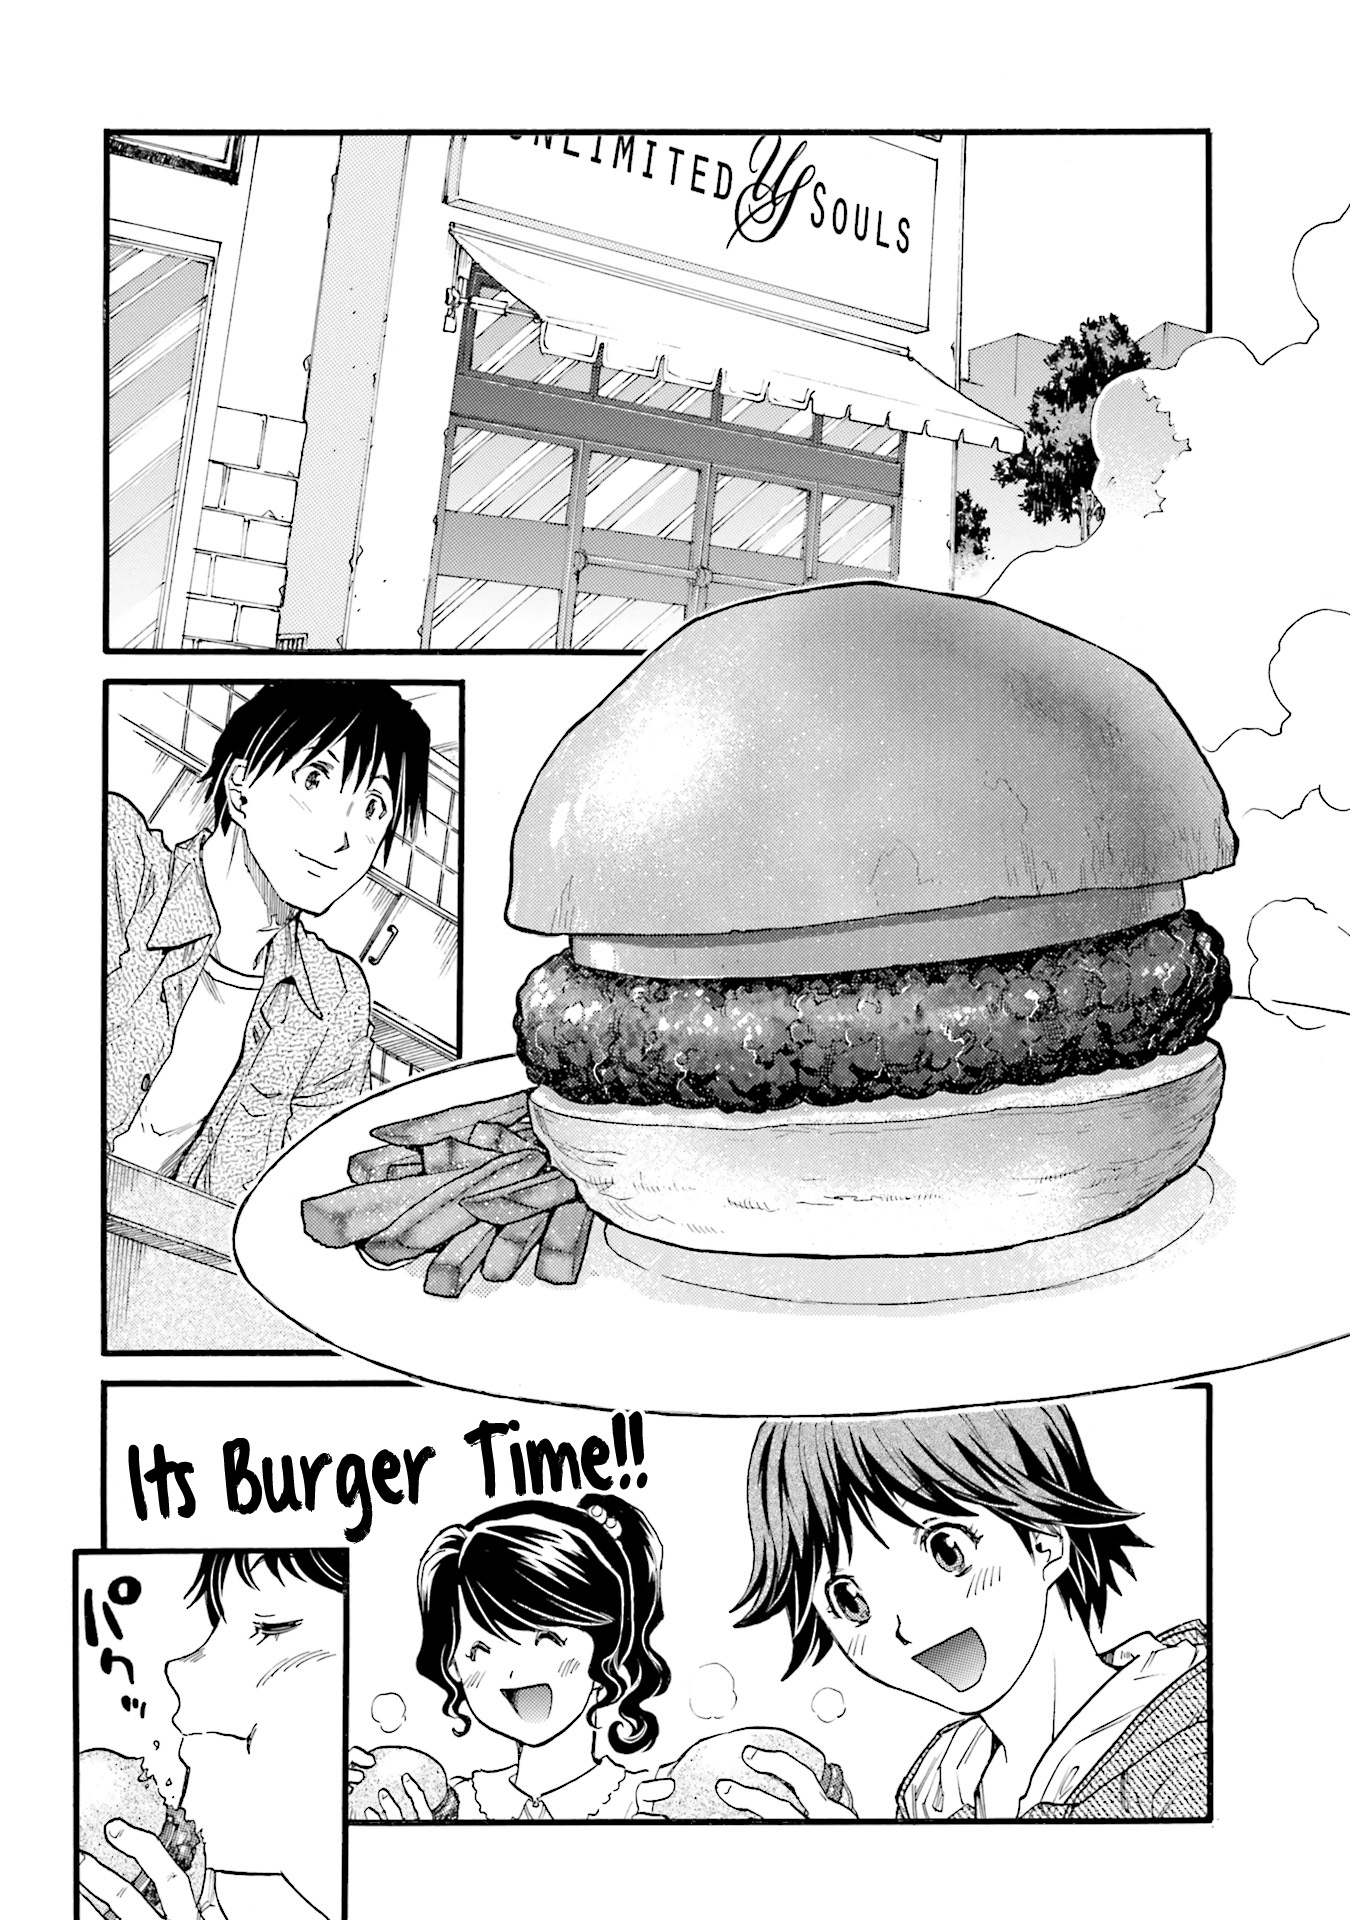 Today's Burger - Page 2